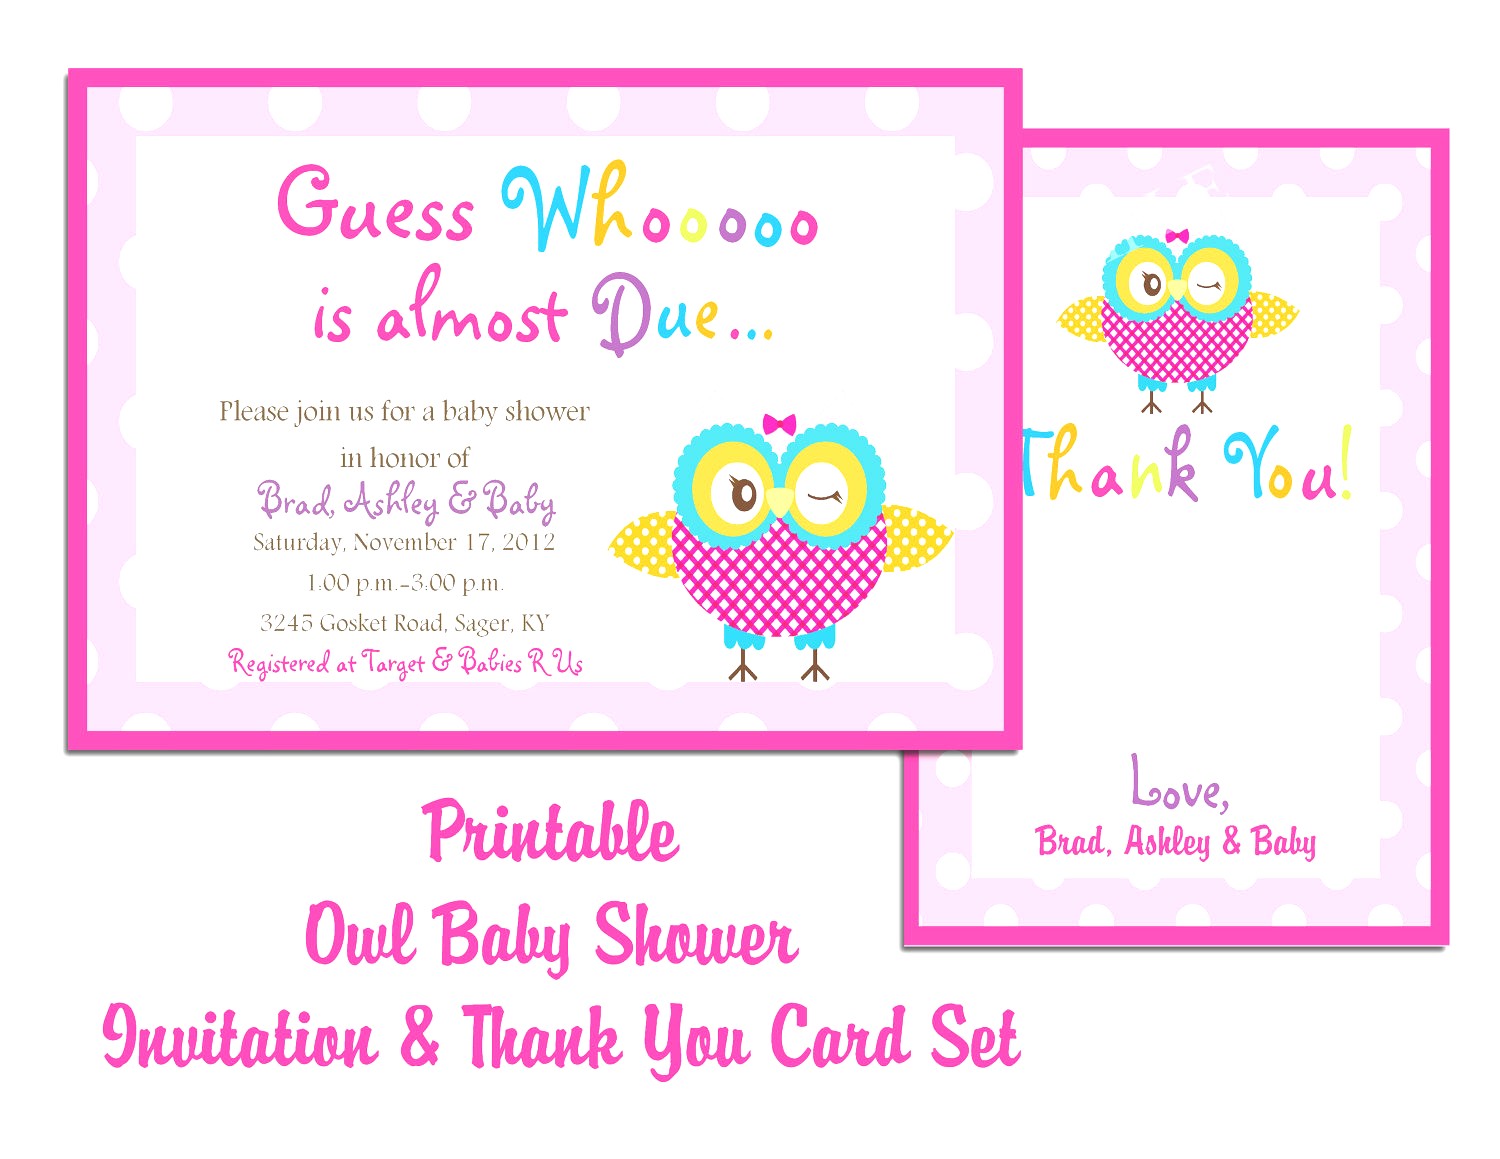 Full Size of Baby Shower:sturdy Baby Shower Invitation Template Image Concepts Baby Shower List With Baby Shower Party Themes Plus Unique Baby Shower Games Together With Baby Shower Video As Well As Baby Shower Host And Adornos Para Baby Shower